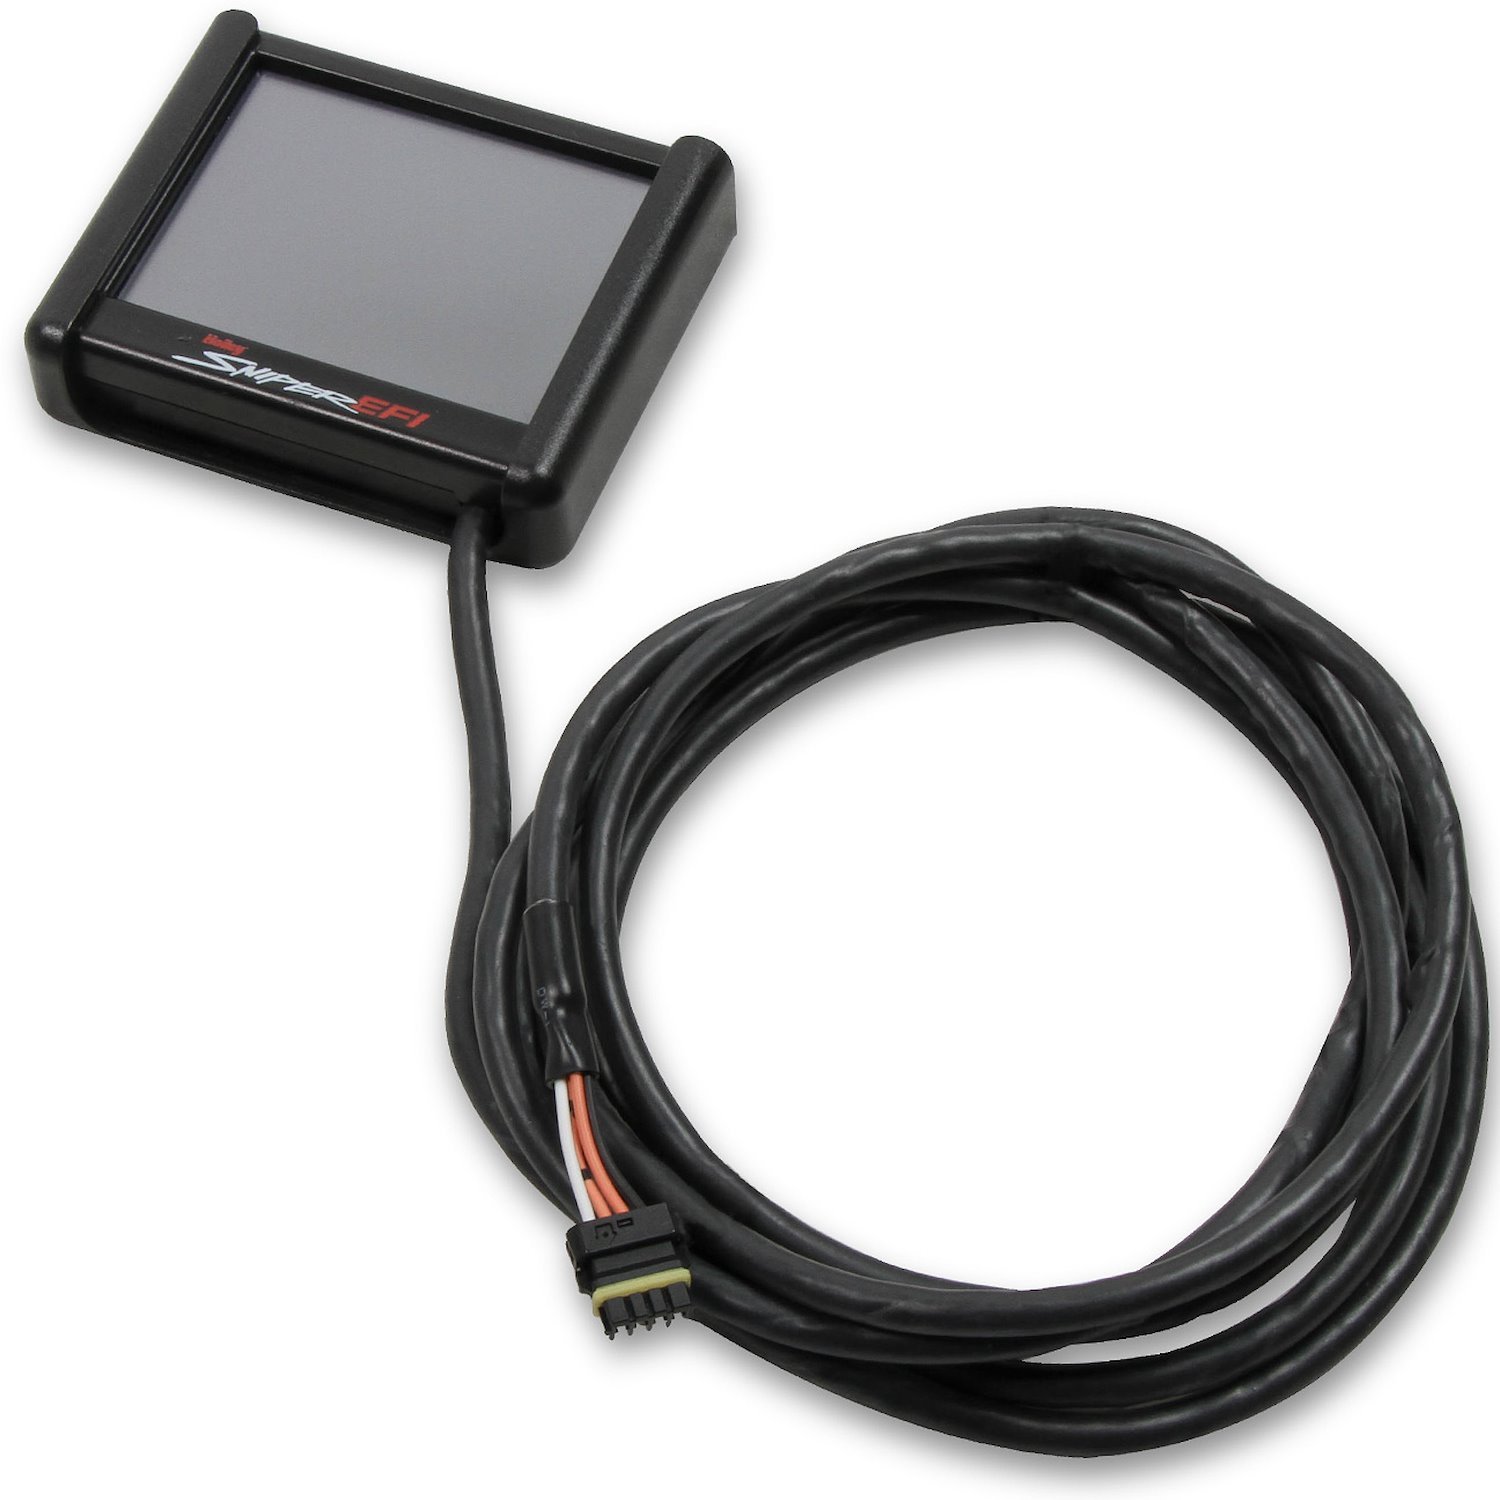 553-115 LCD Handheld Controller Interface w/3.50 in. Touch Screen for Sniper 1 EFI Conversion